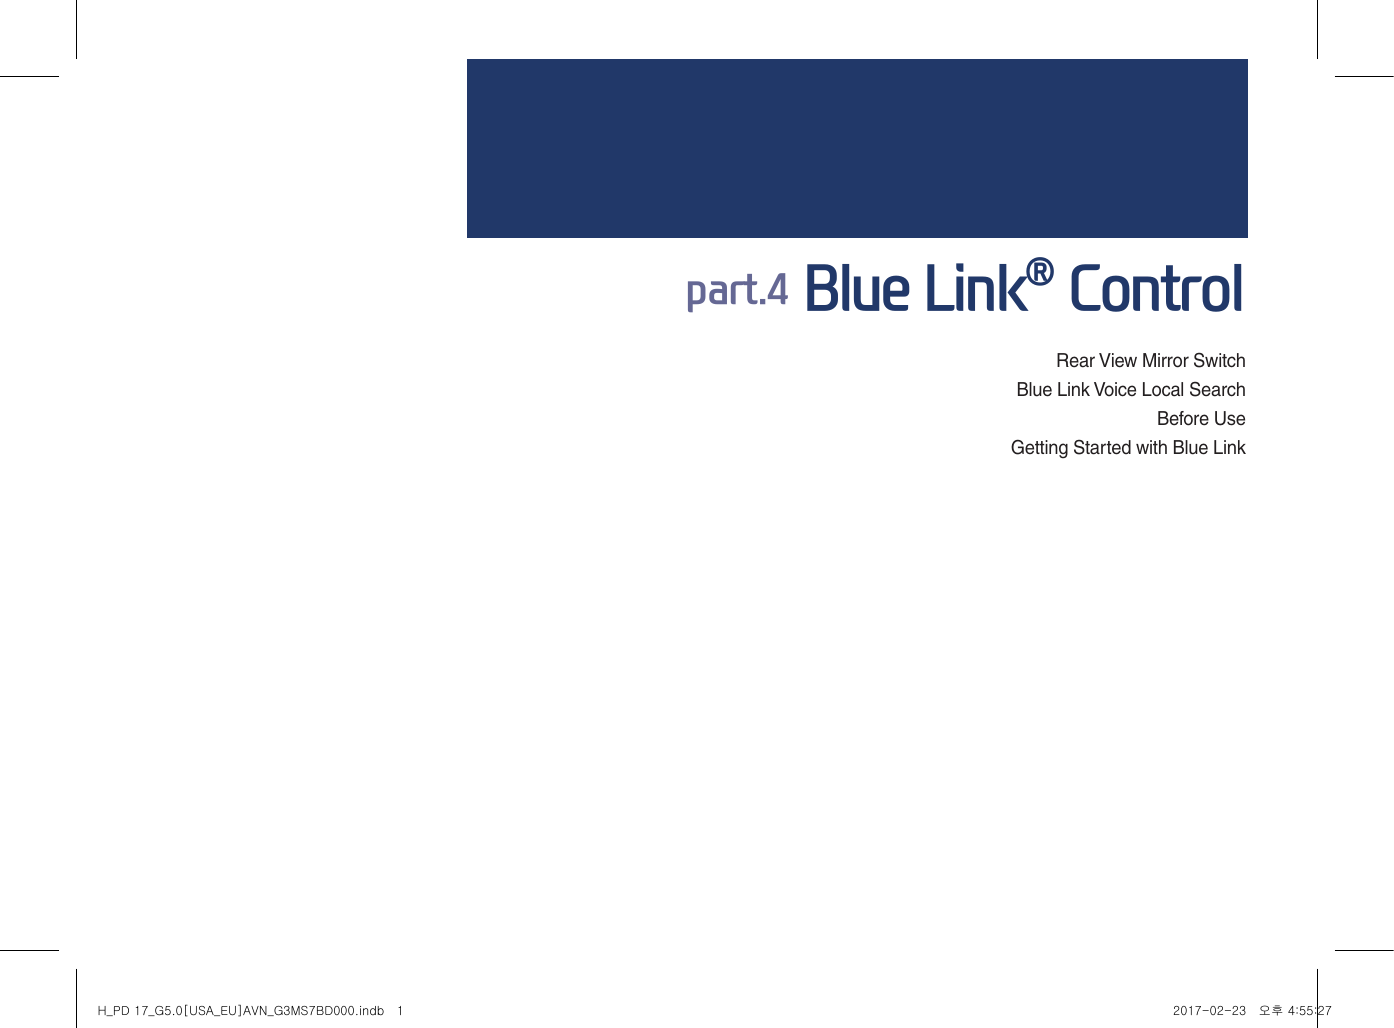 part.4 Blue Link® ControlRear View Mirror SwitchBlue Link Voice Local SearchBefore UseGetting Started with Blue LinkH_PD 17_G5.0[USA_EU]AVN_G3MS7BD000.indb   1 2017-02-23   오후 4:55:27